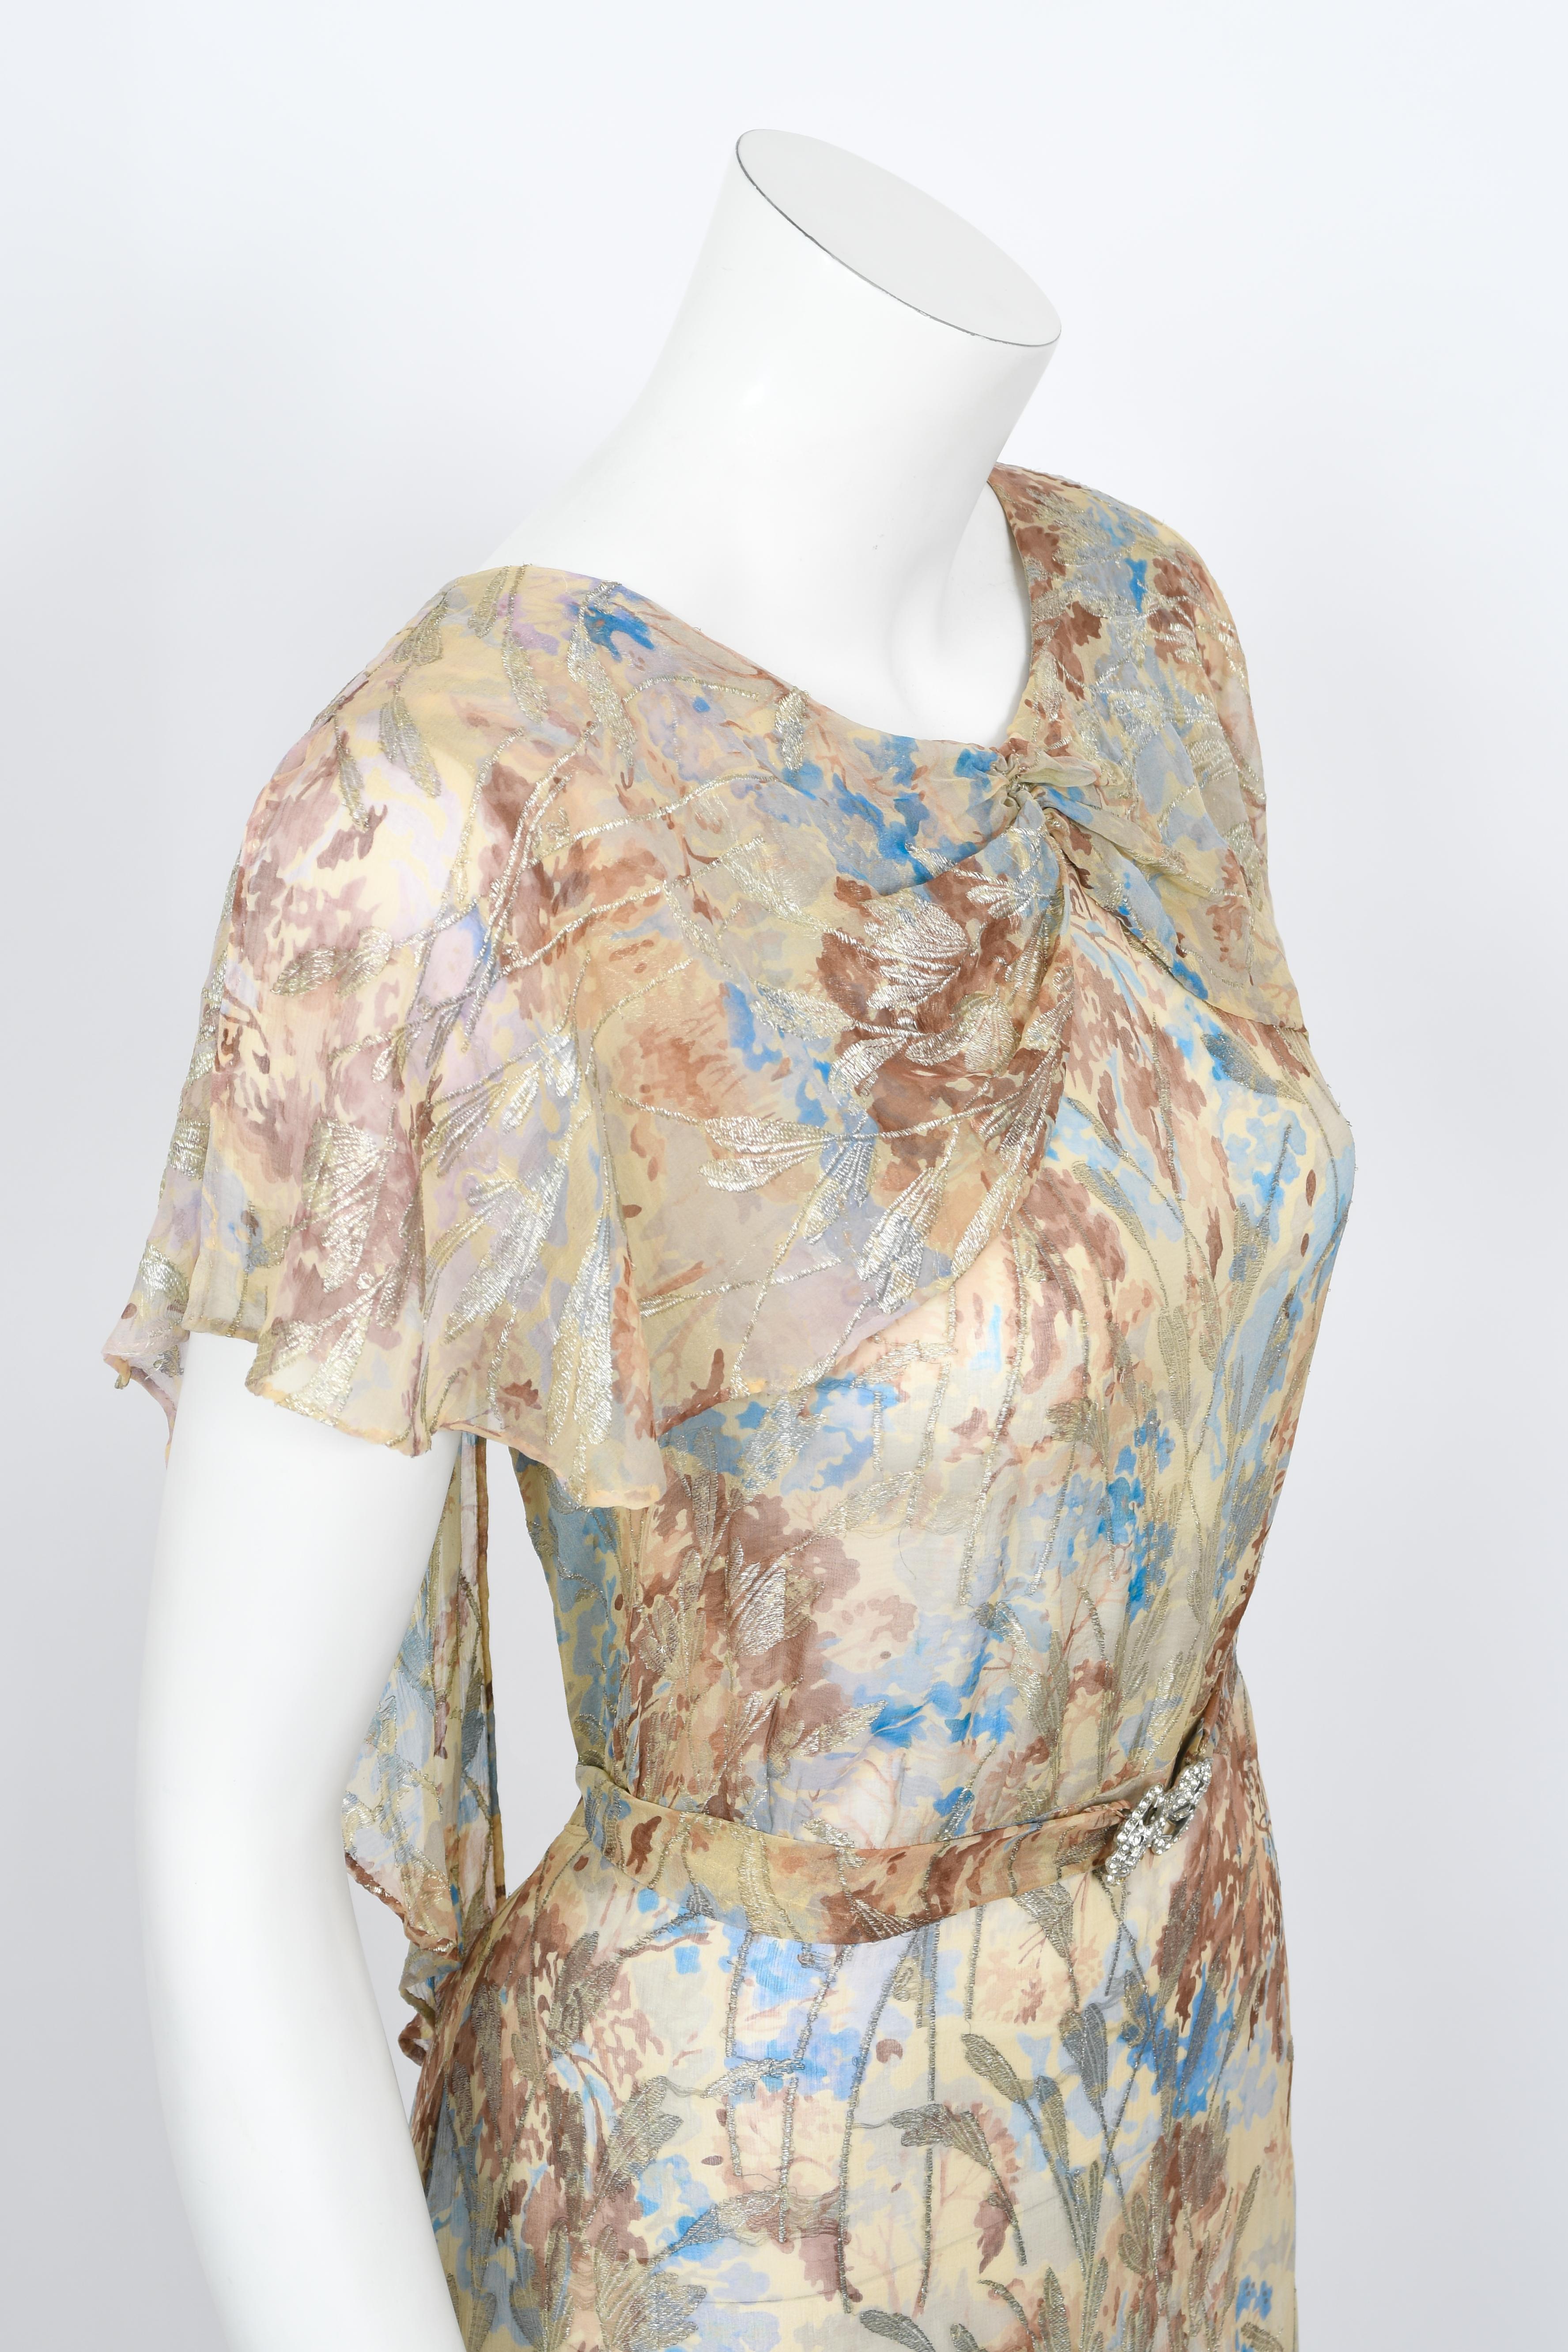 1930's Metallic Floral Semi-Sheer Lamé Silk Capelet Drape Belted Couture Gown For Sale 4